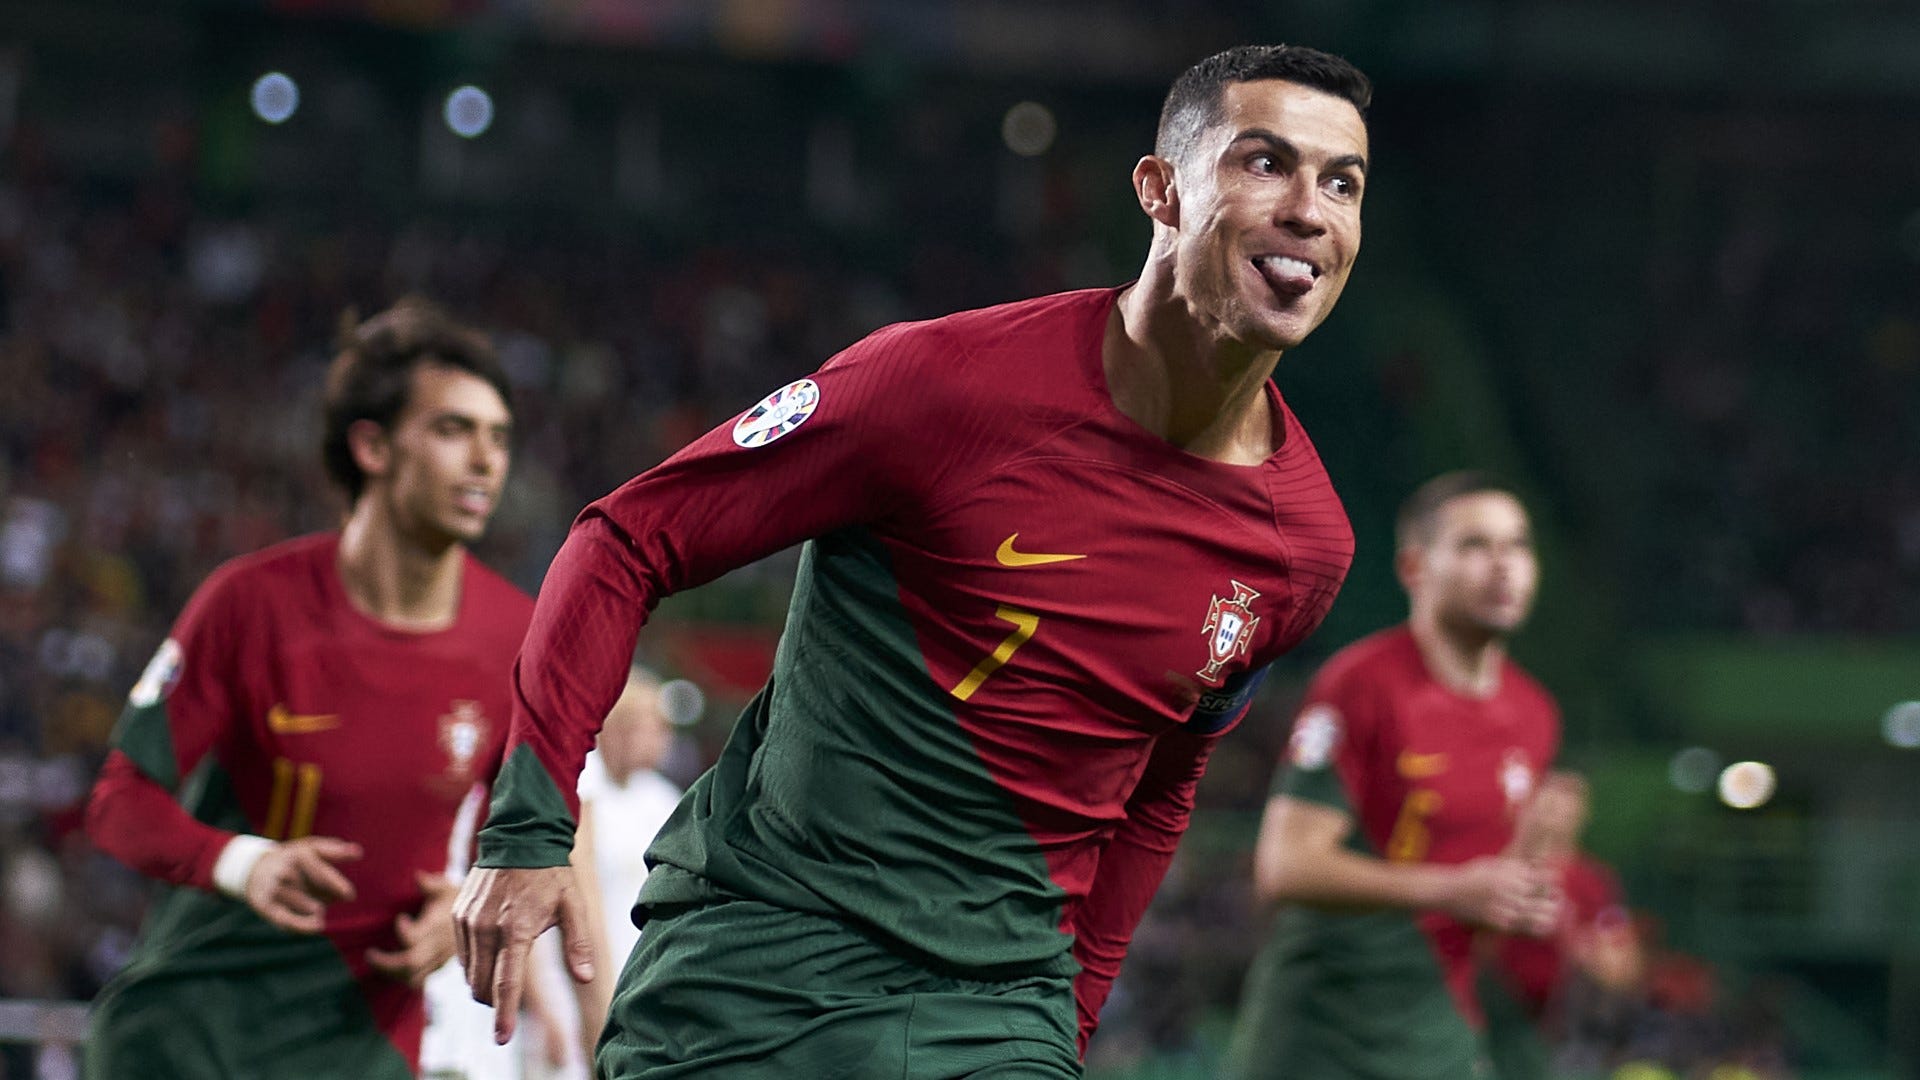 WATCH: Cristiano Ronaldo smashes home Portugal free-kick to become first male player to score 100 competitive international goals